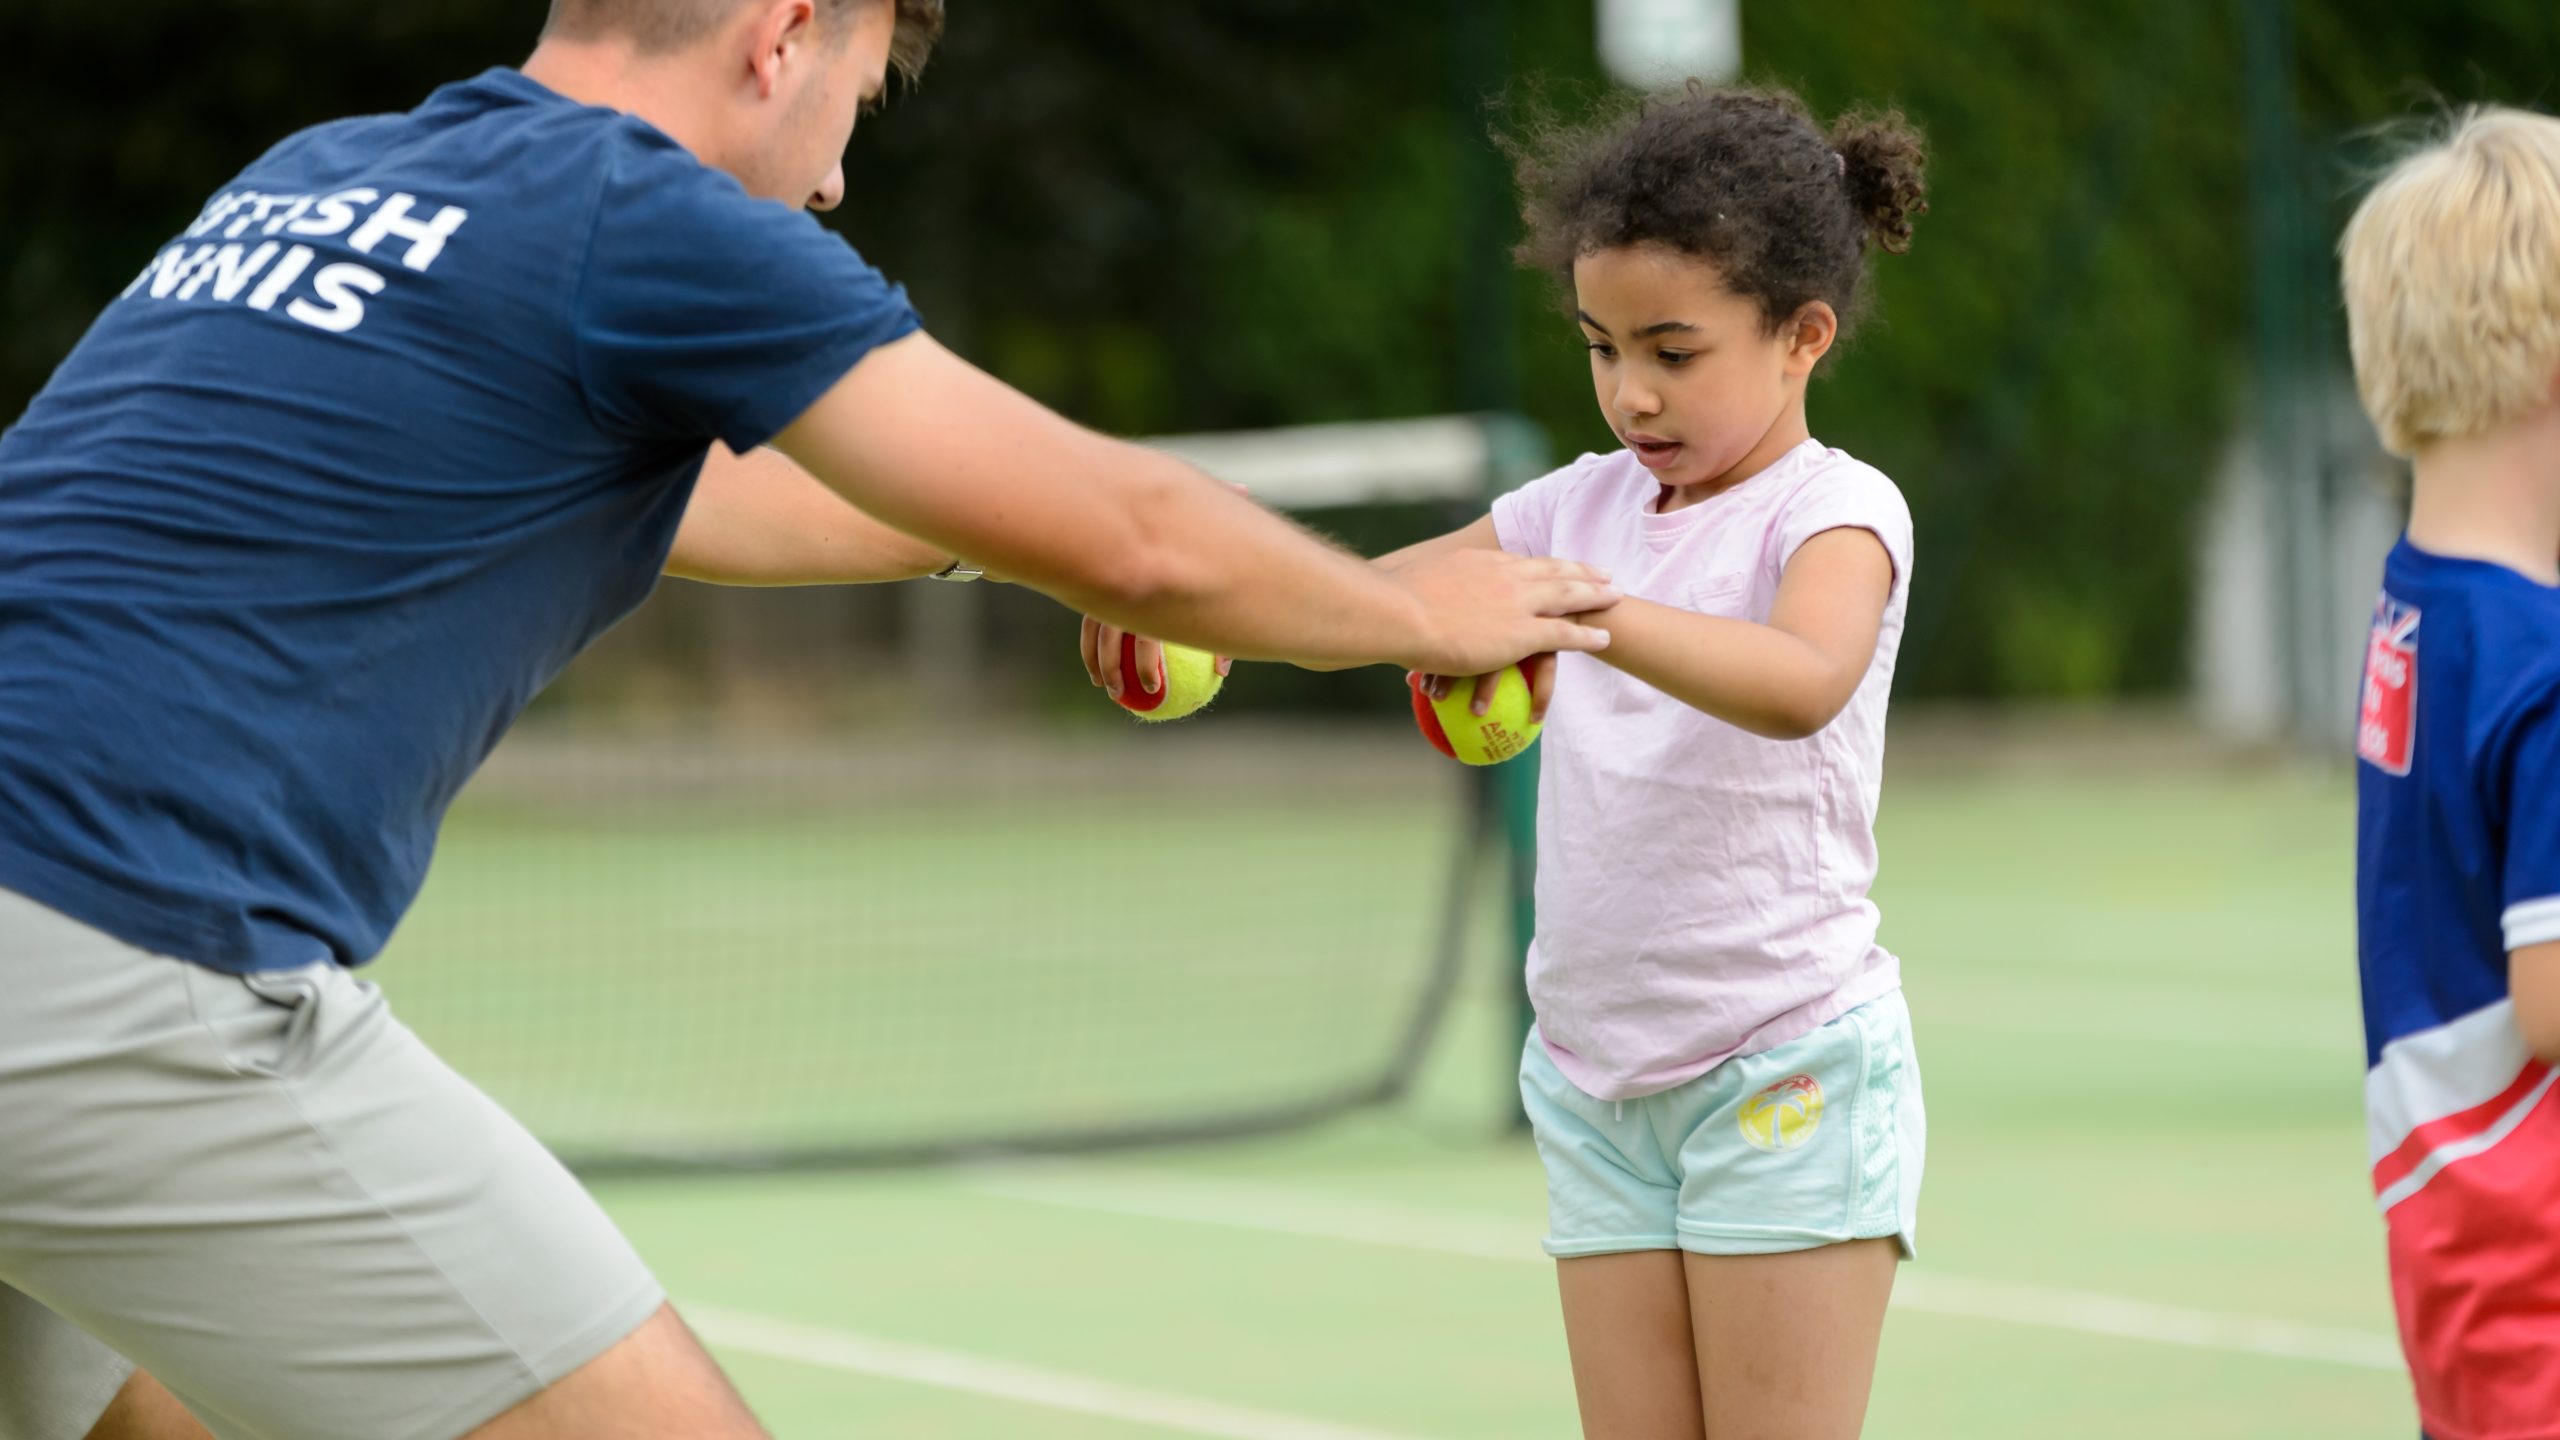 Tennis coach and young girl